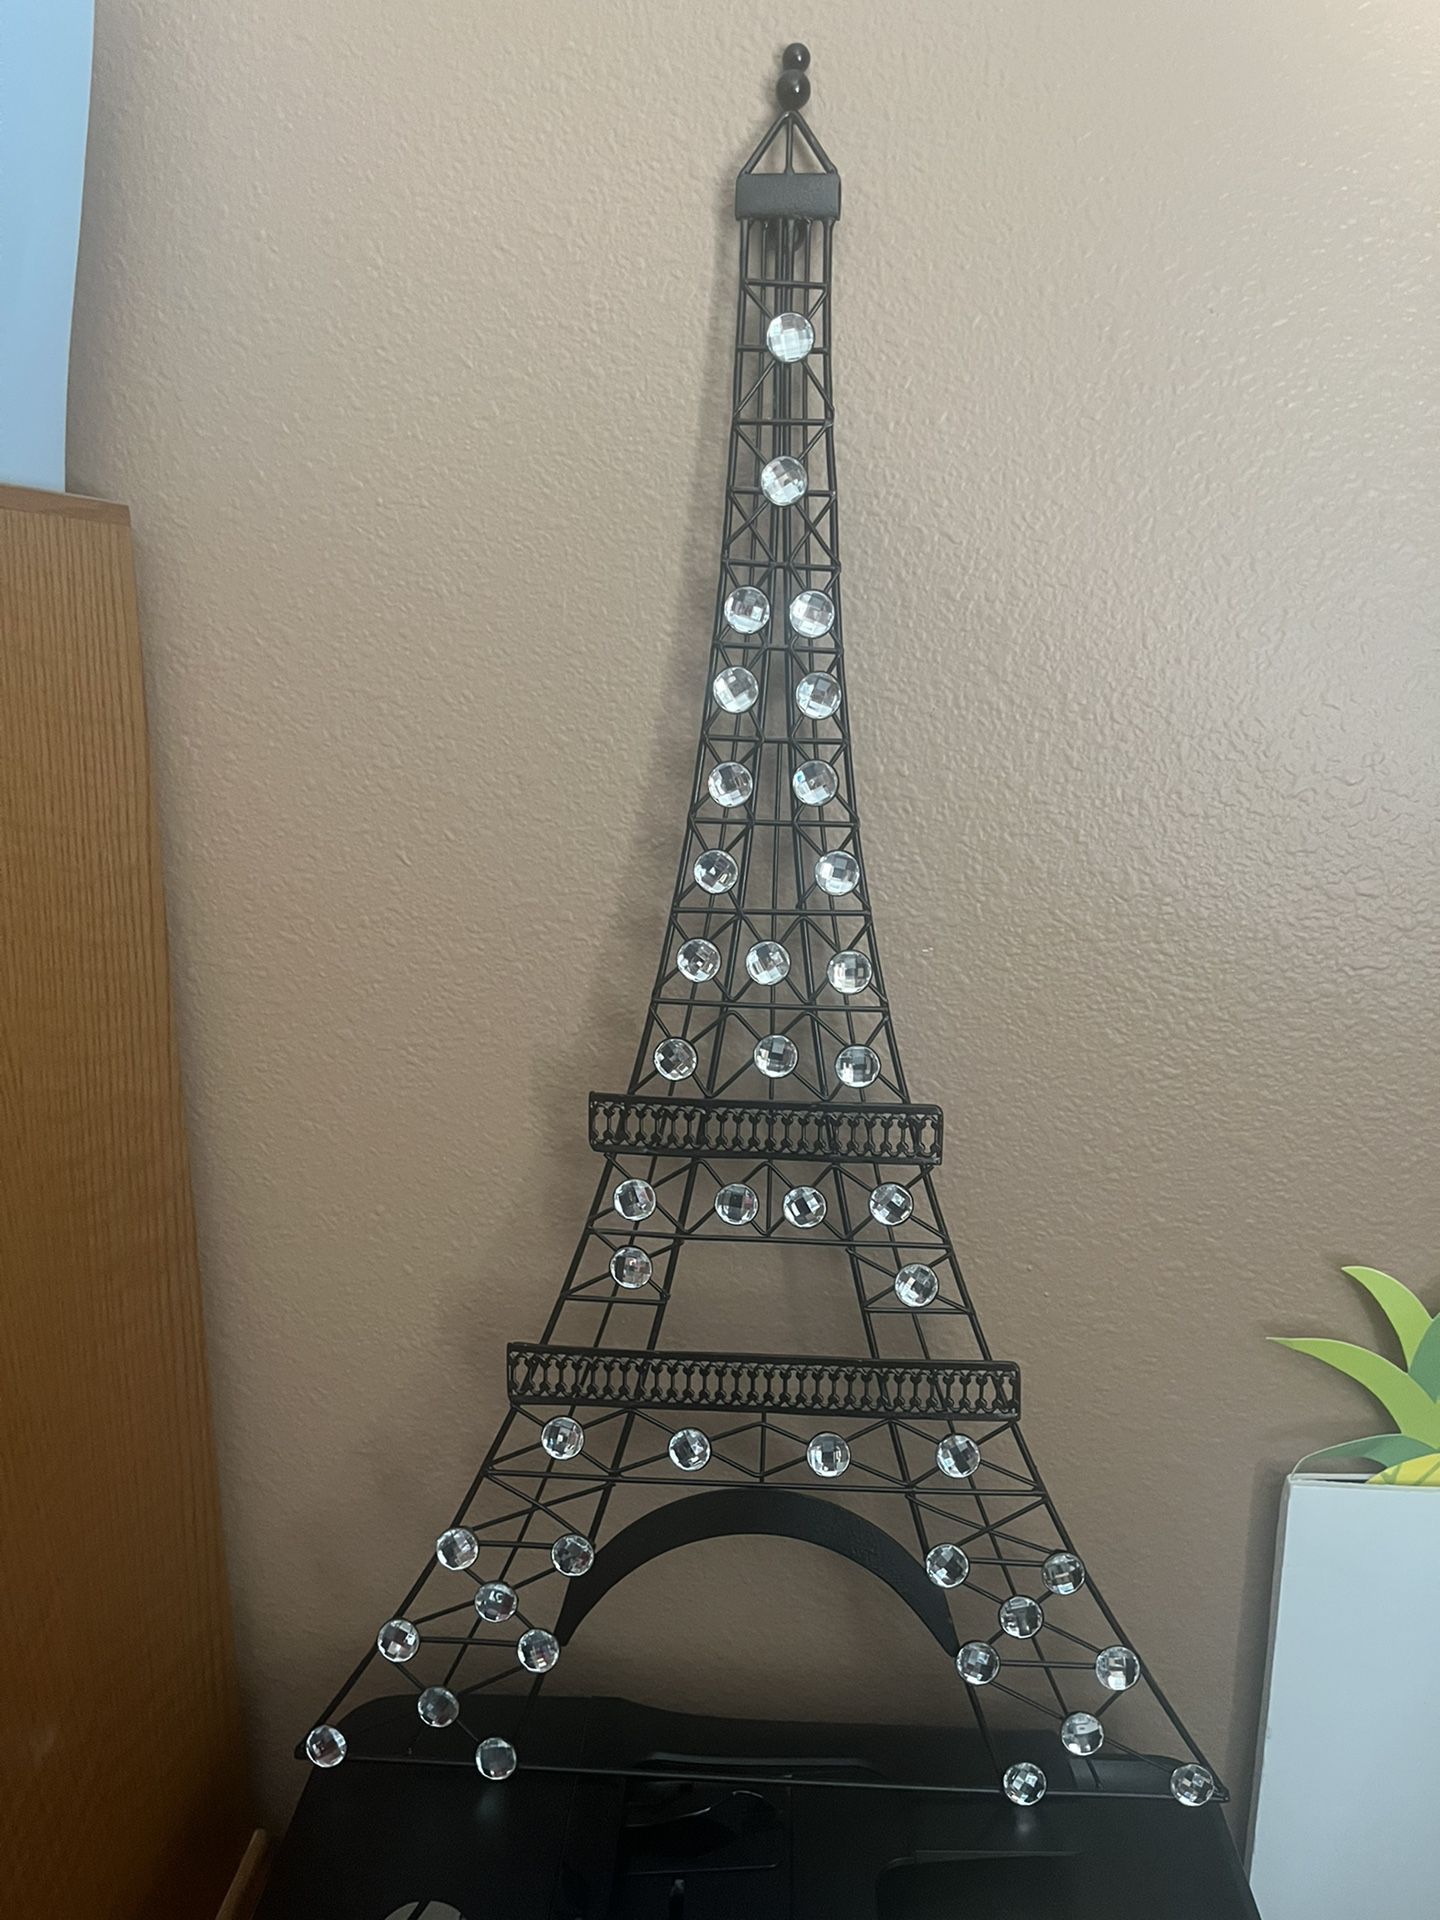 Paris Themed Wall Decor $30 for all